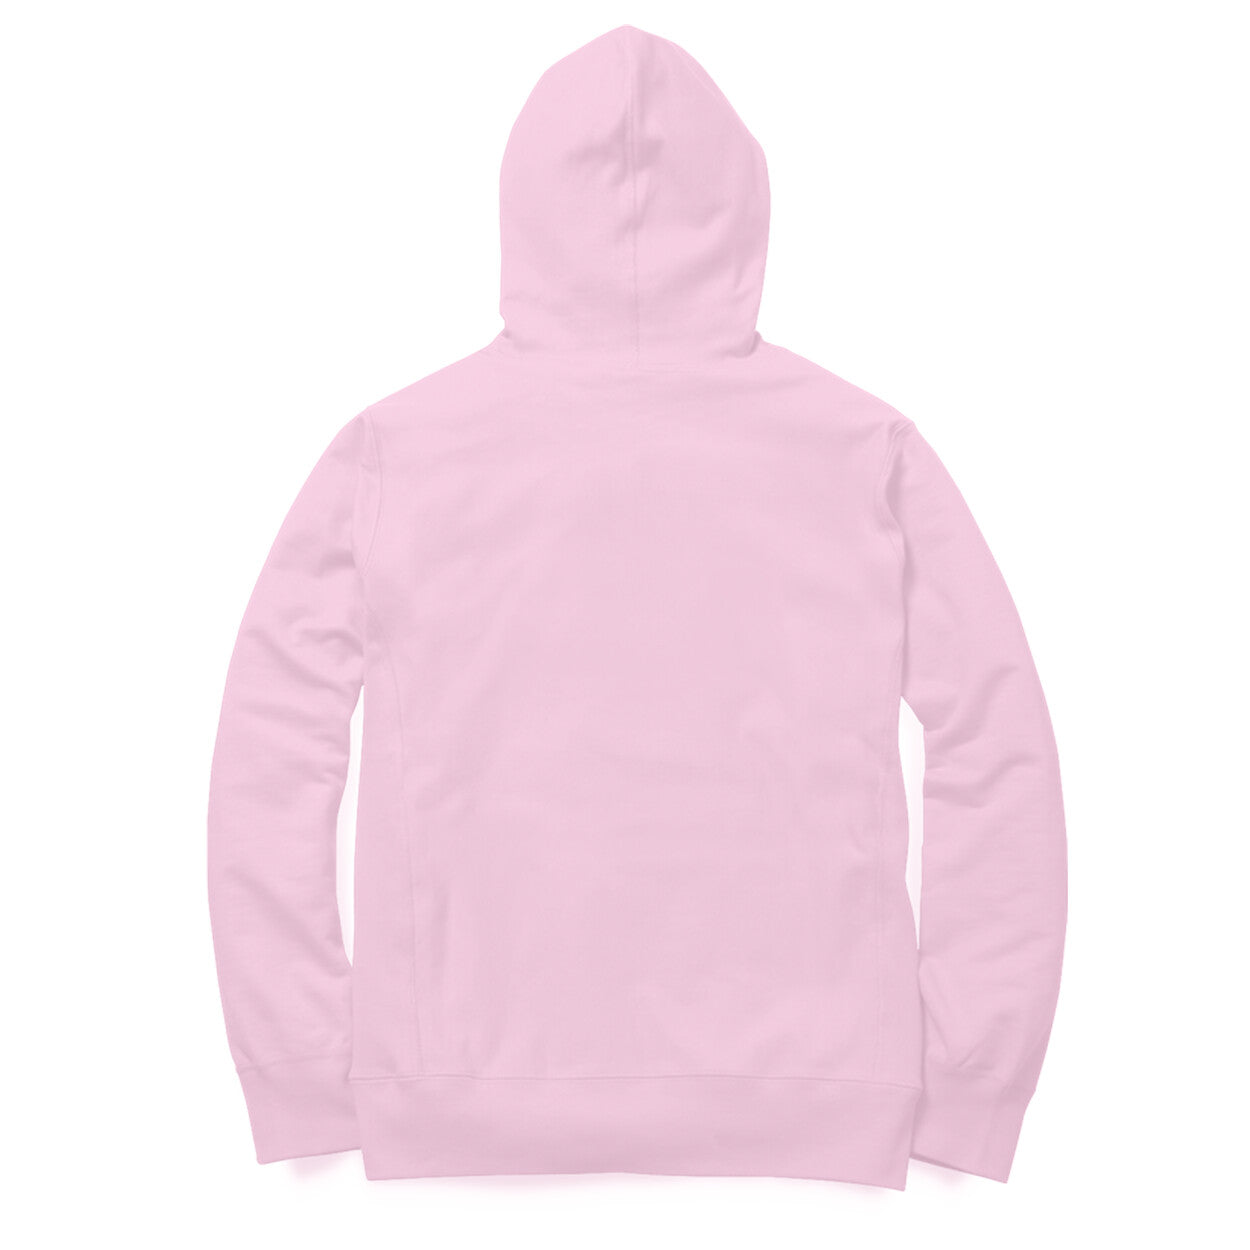 HOODIES ONLY Rs 999